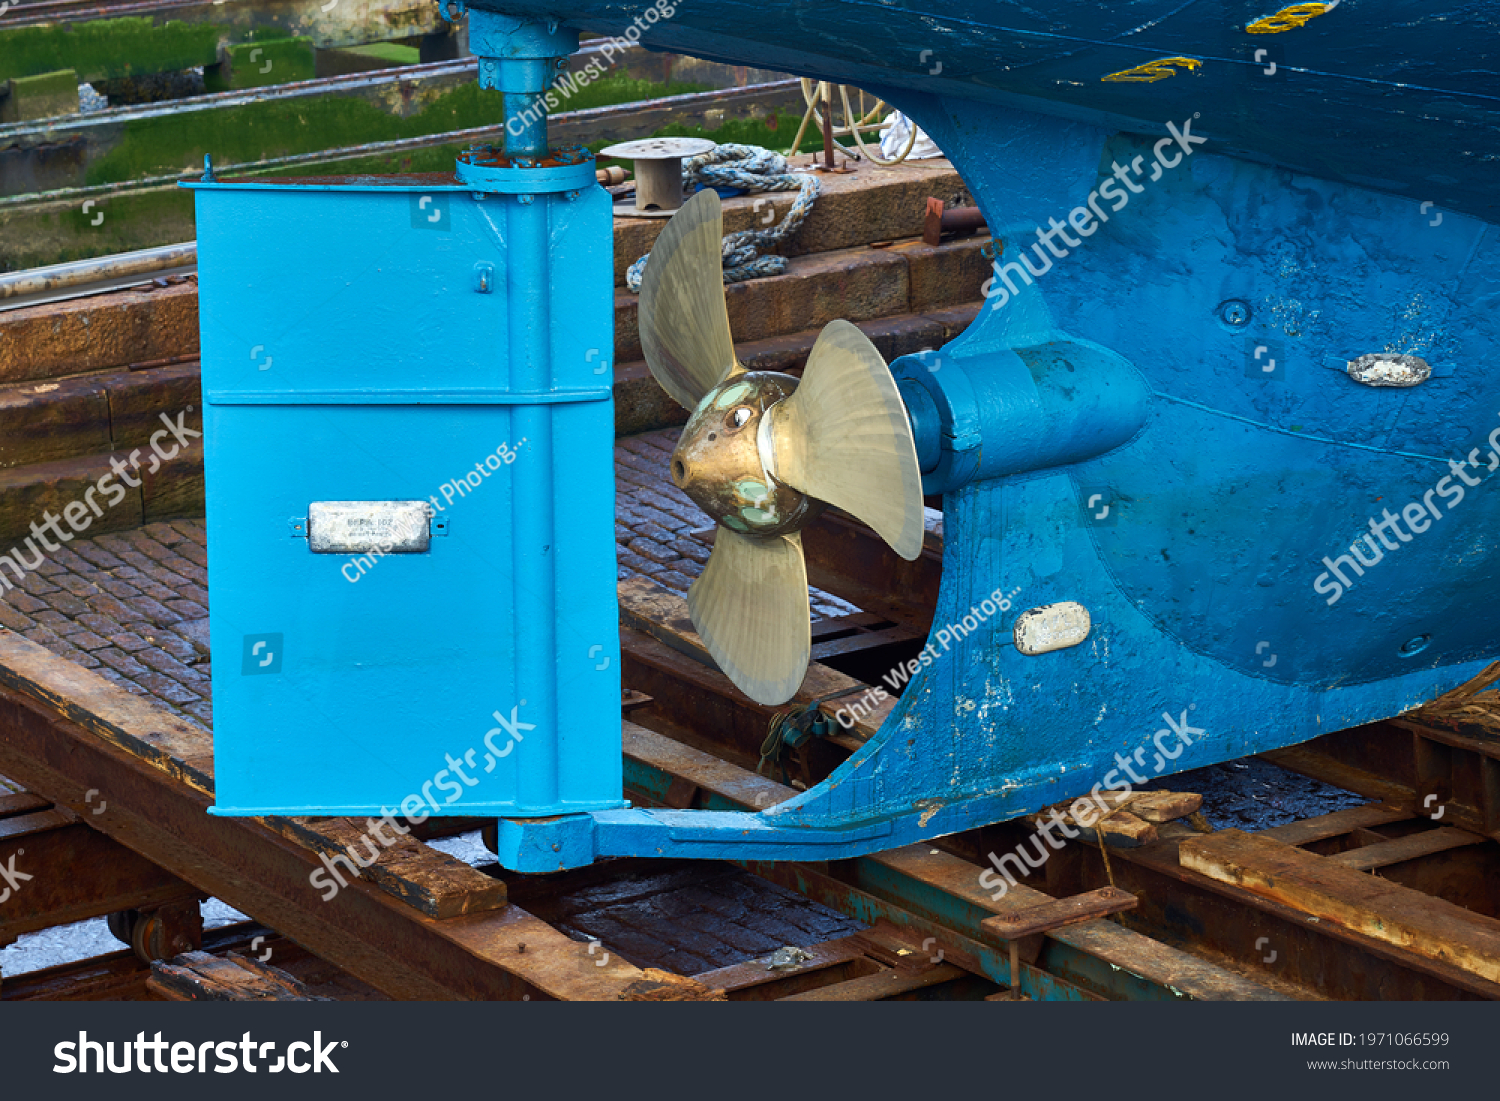 The rudder and propeller of a boat in dry dock #1971066599